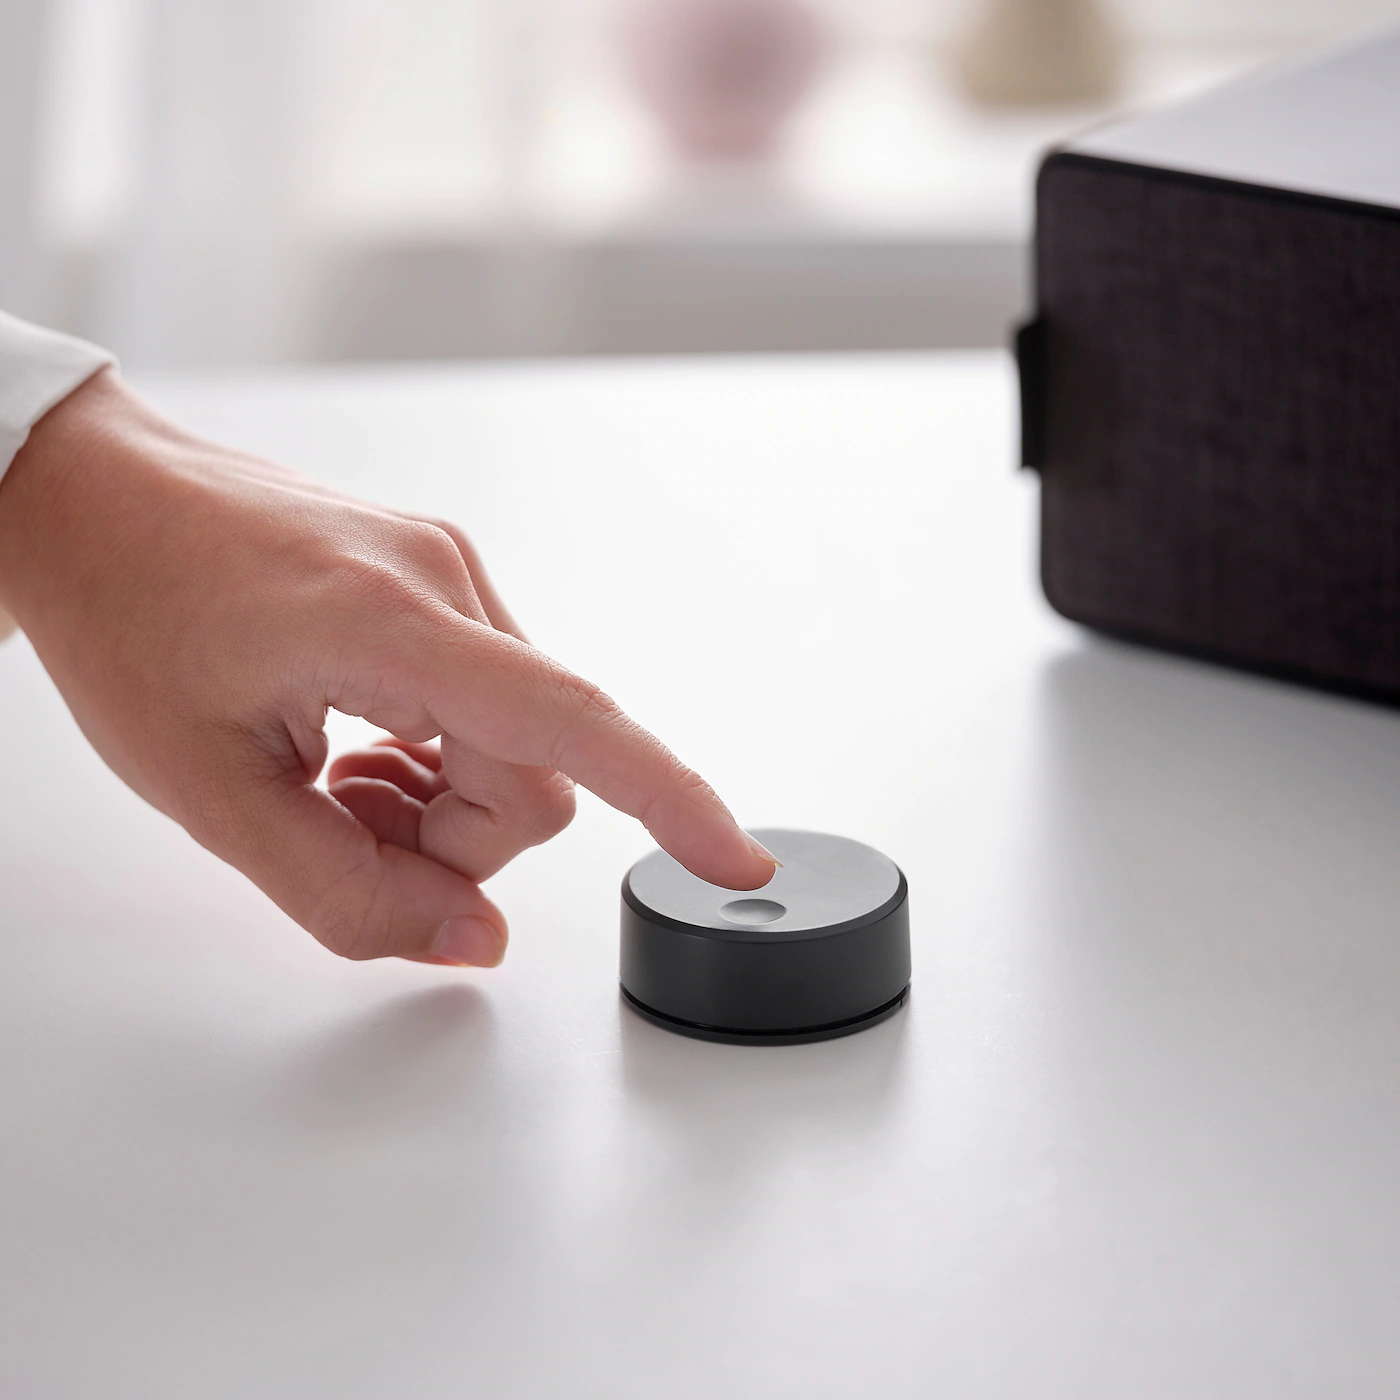 Here’s Ikea’s €15 remote control for Sonos, coming soon